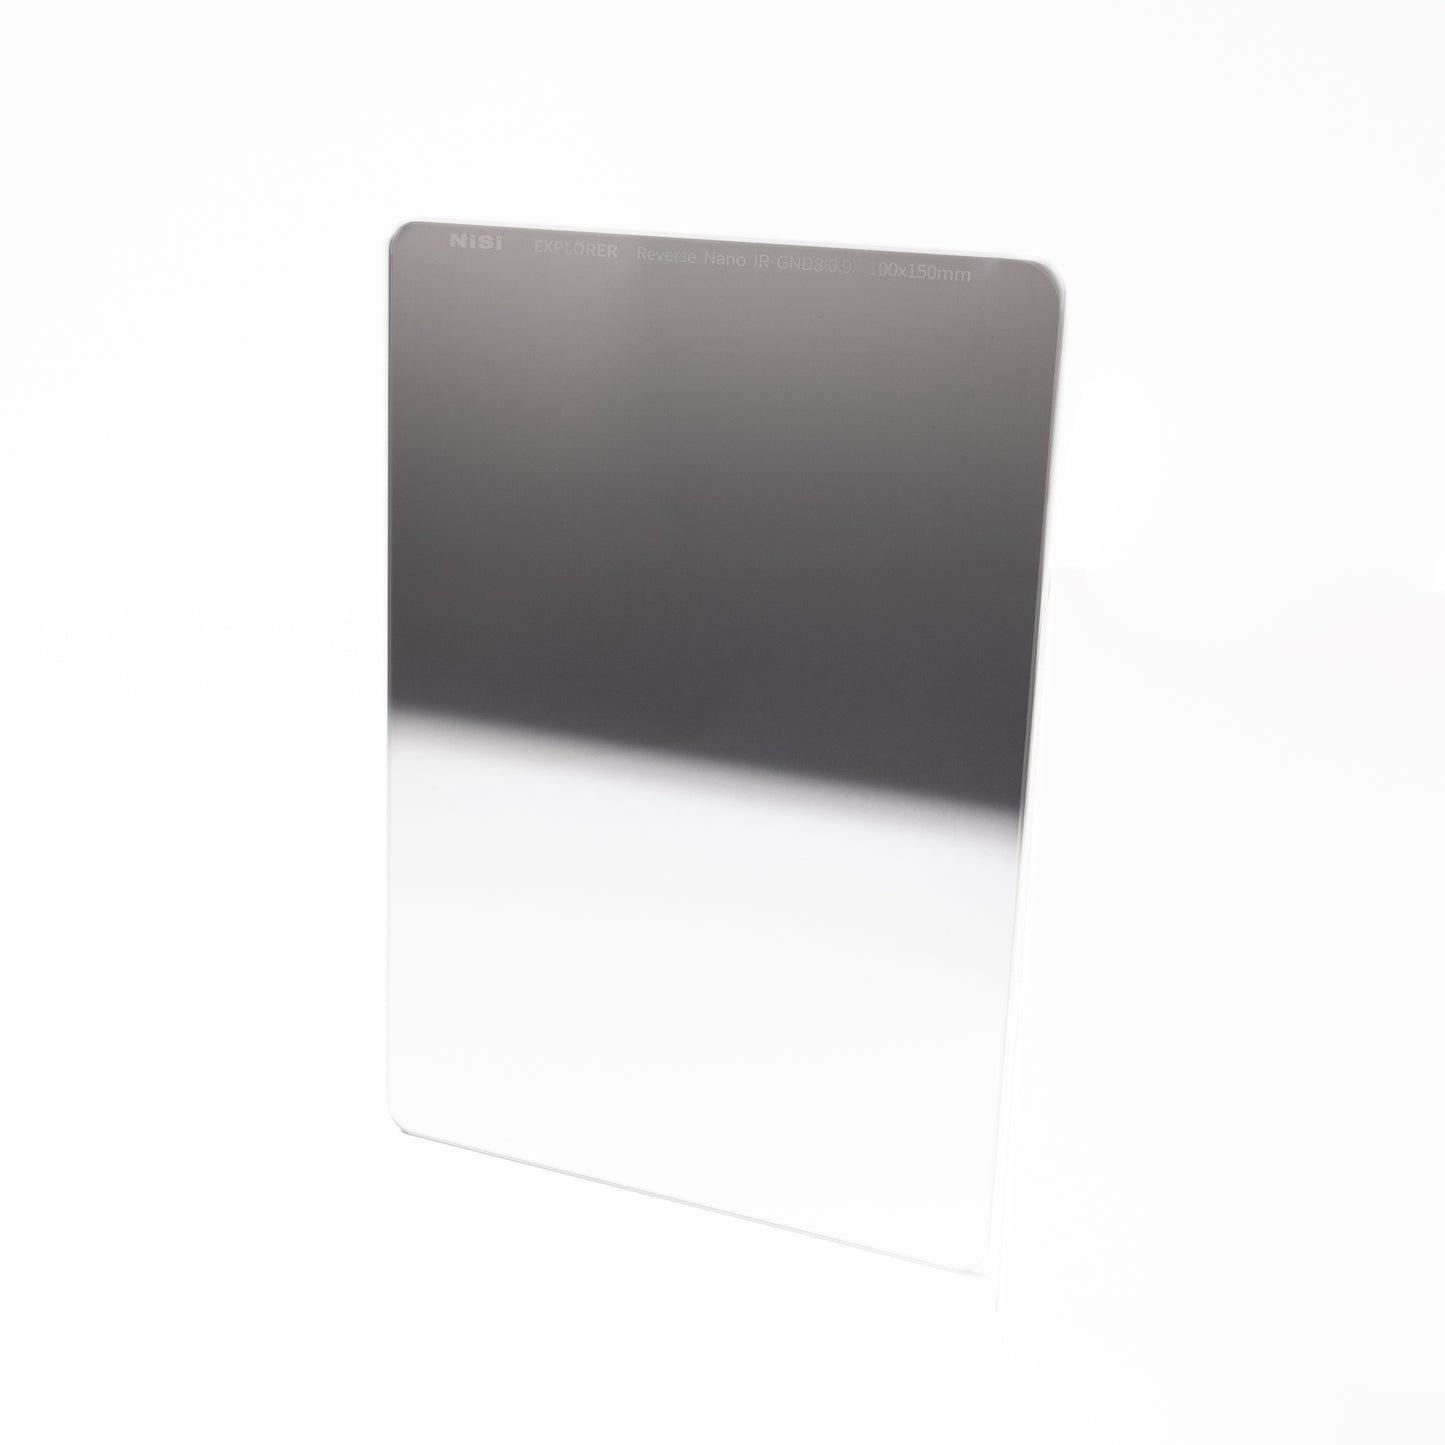 NiSi Explorer Collection 100x150mm Nano IR Reverse Graduated Neutral Density Filter - GND8 (0.9) - 3 Stop